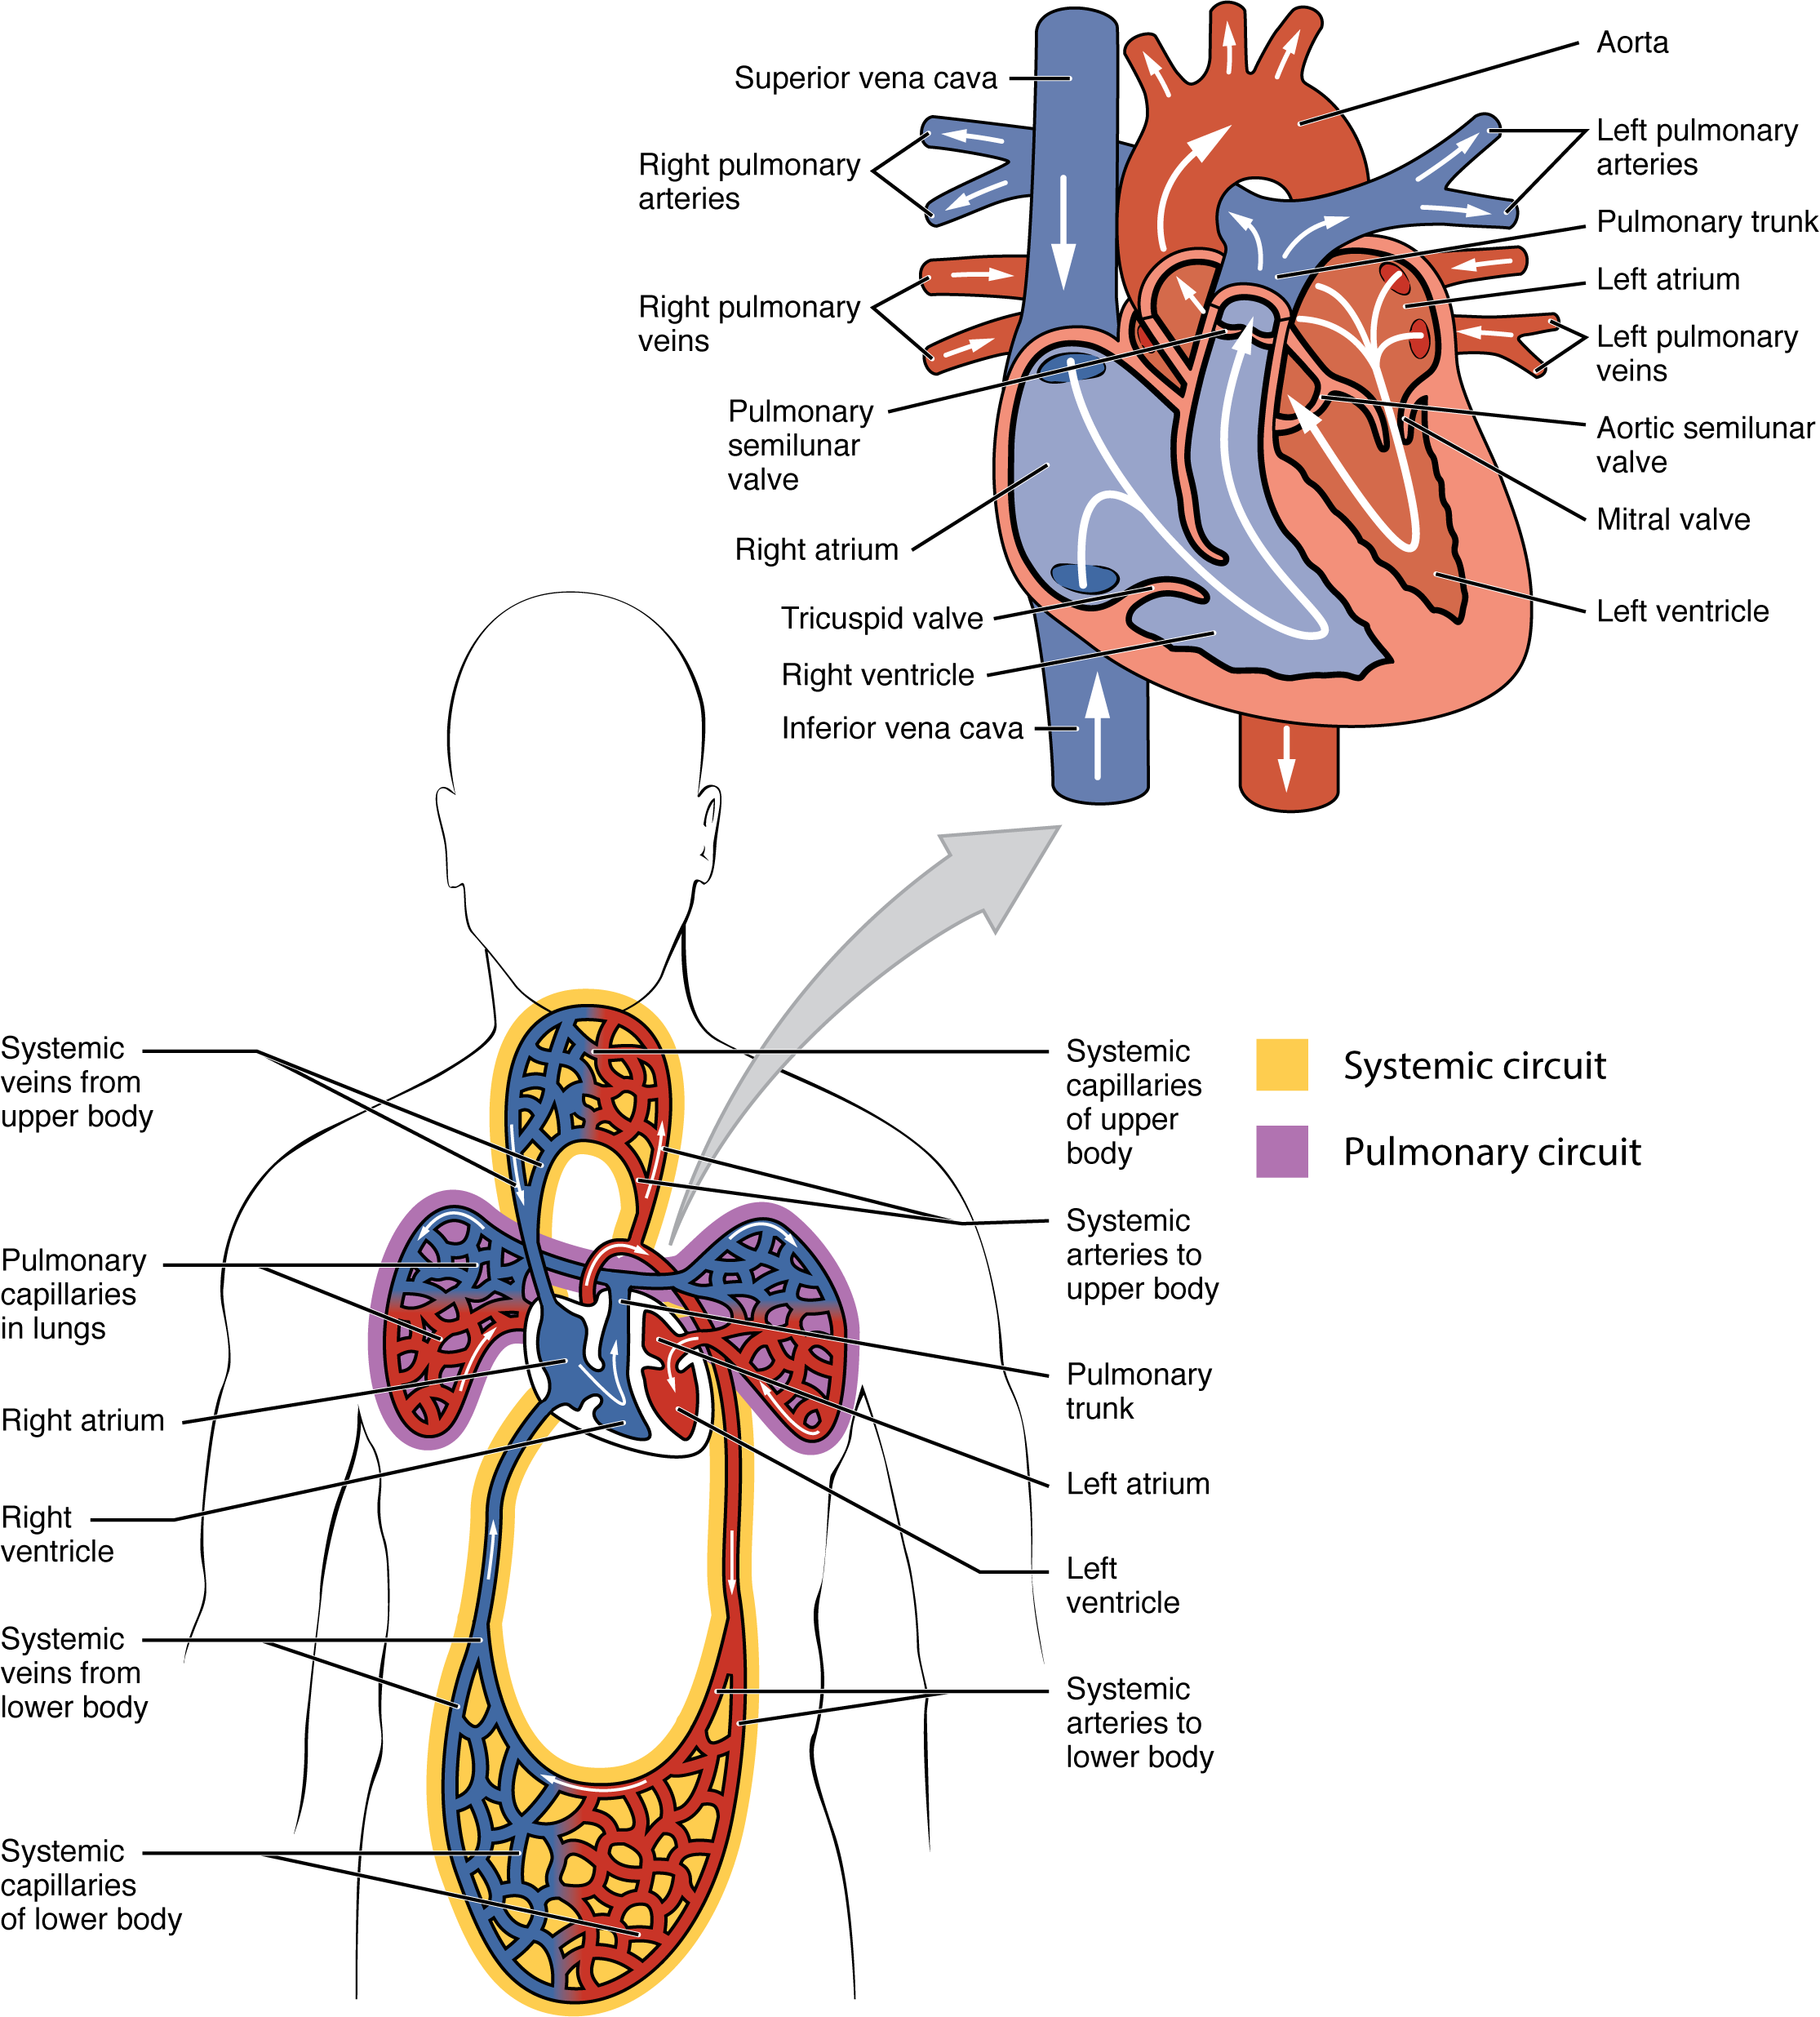 The top panel shows the human heart with the arteries and veins labeled. The bottom panel shows the human circulatory system.